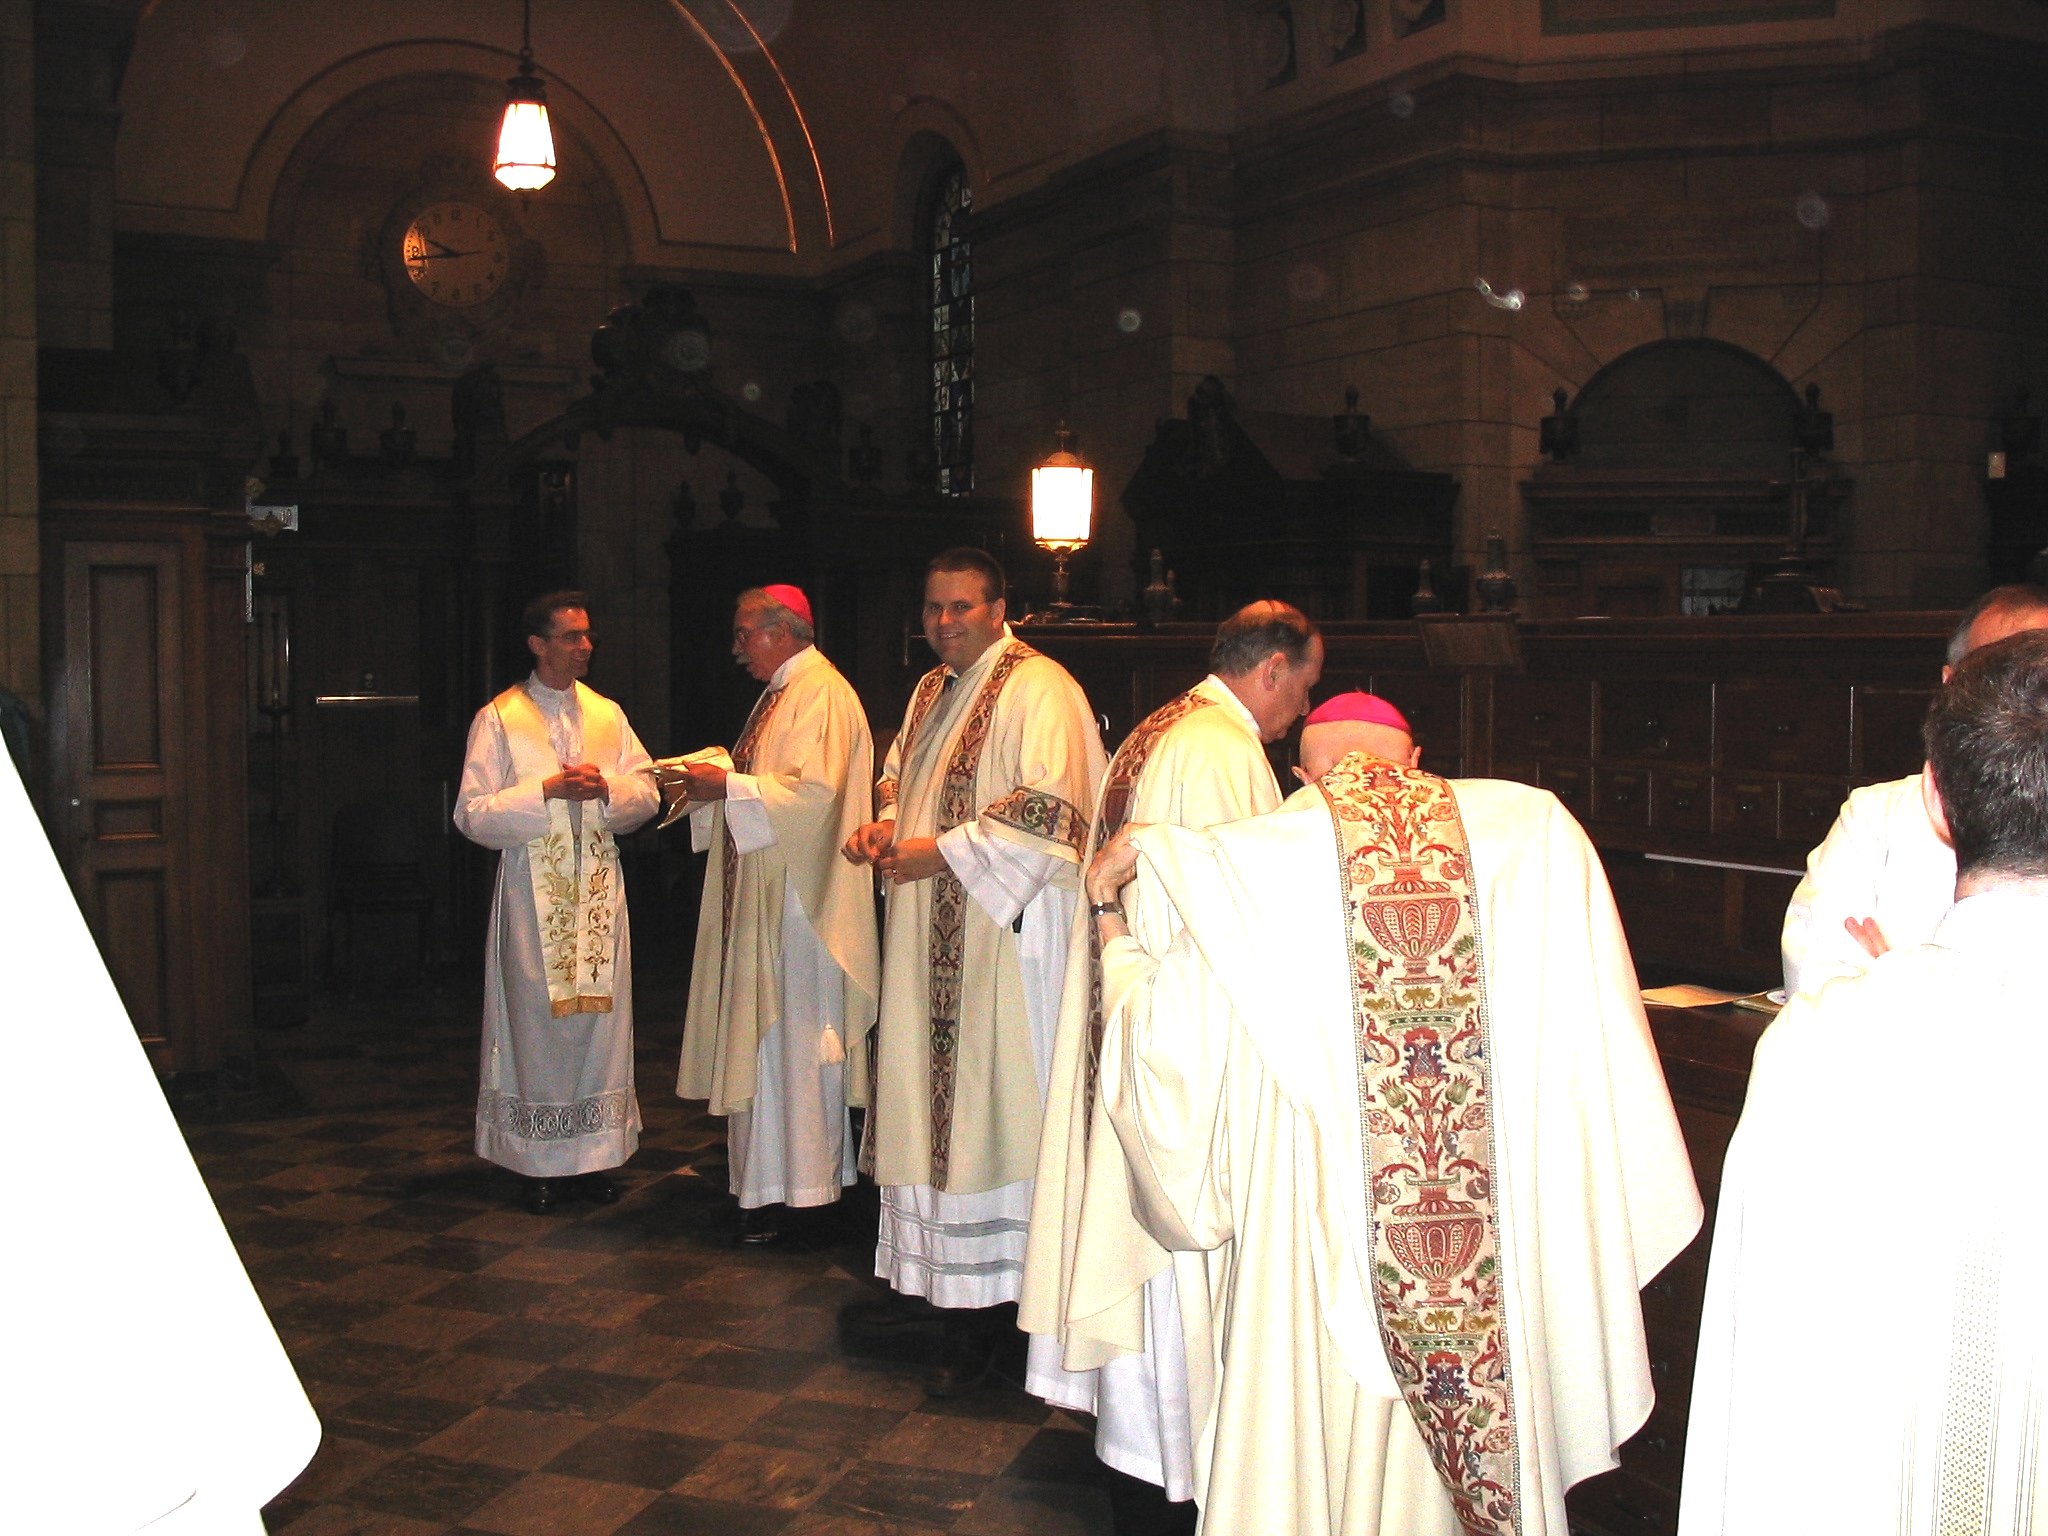 the priests at the alter of a church